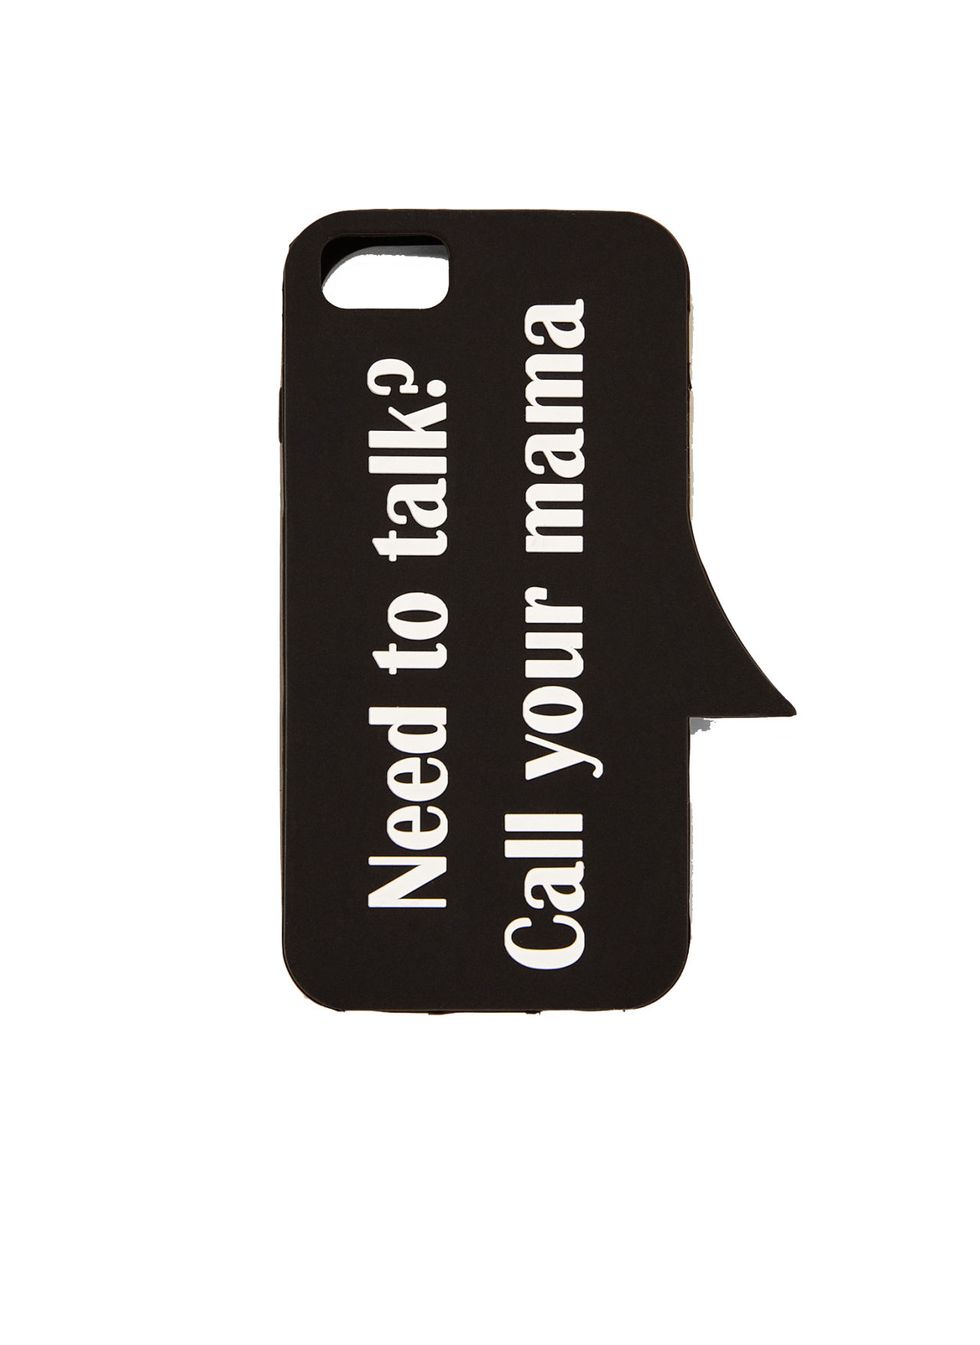 Mobile phone case, Mobile phone accessories, Font, Technology, Electronic device, 